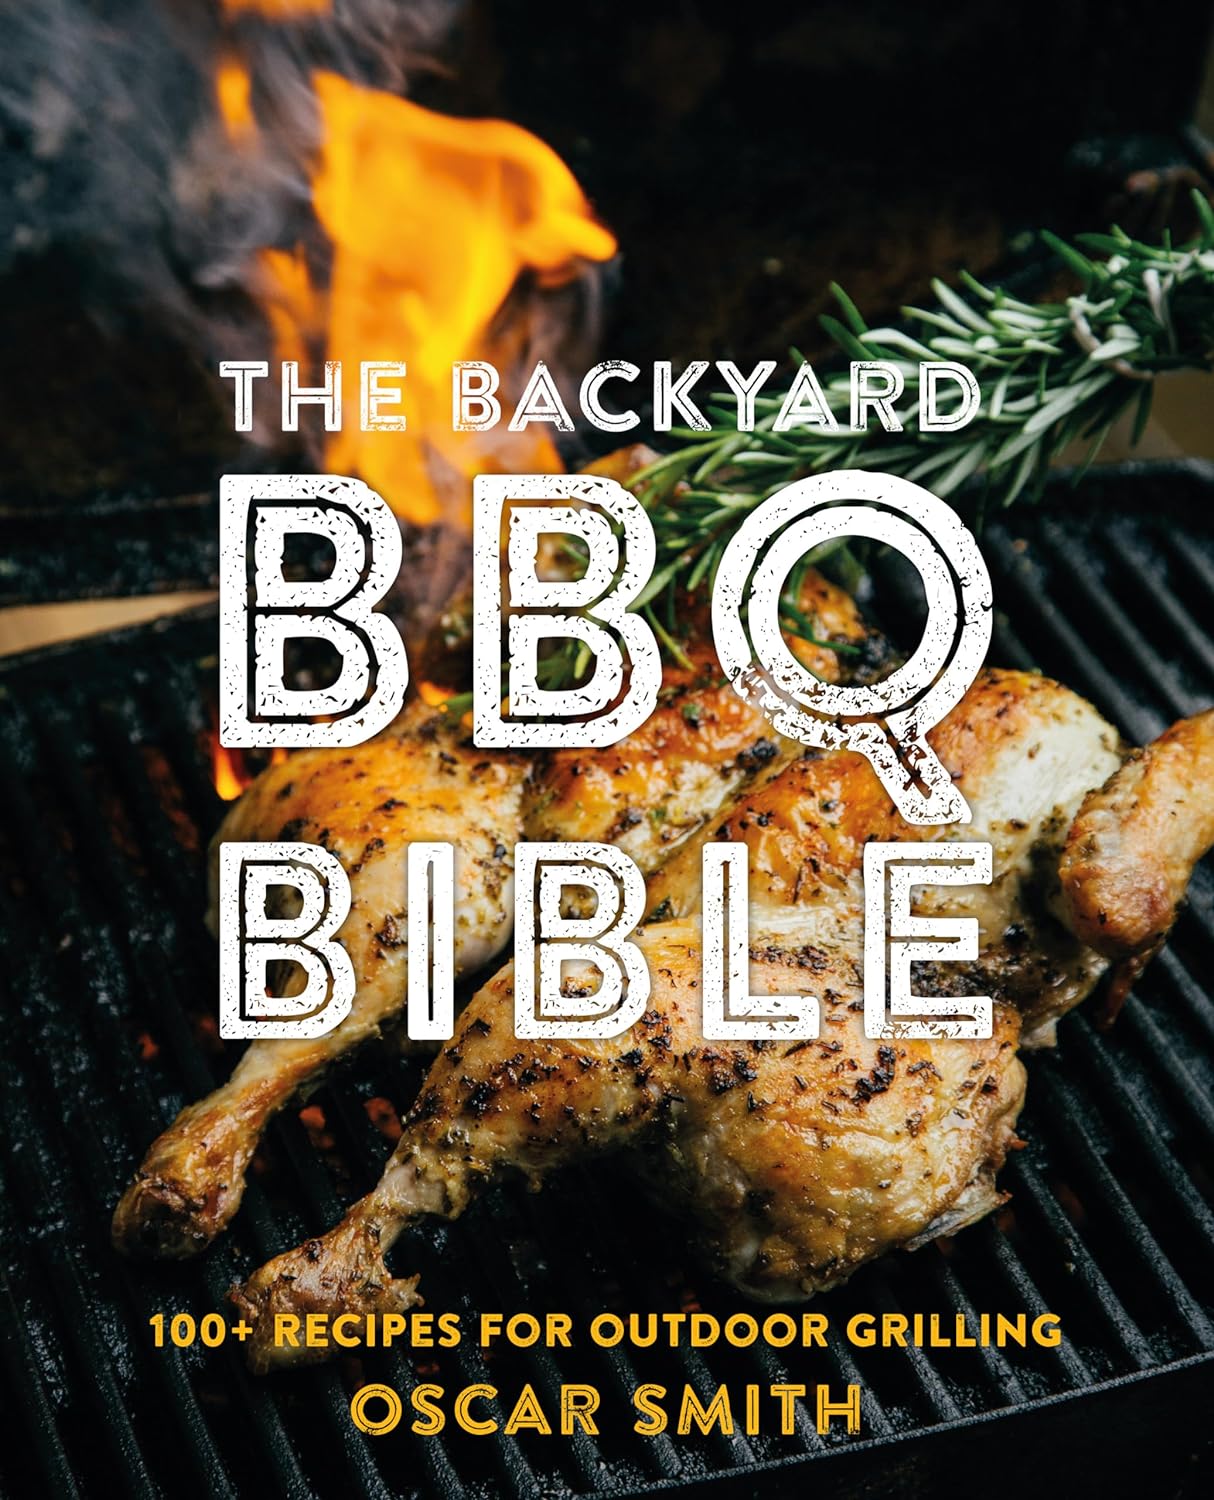 The Backyard BBQ Bible: 100+ Recipes for Outdoor Grilling (Oscar Smith)